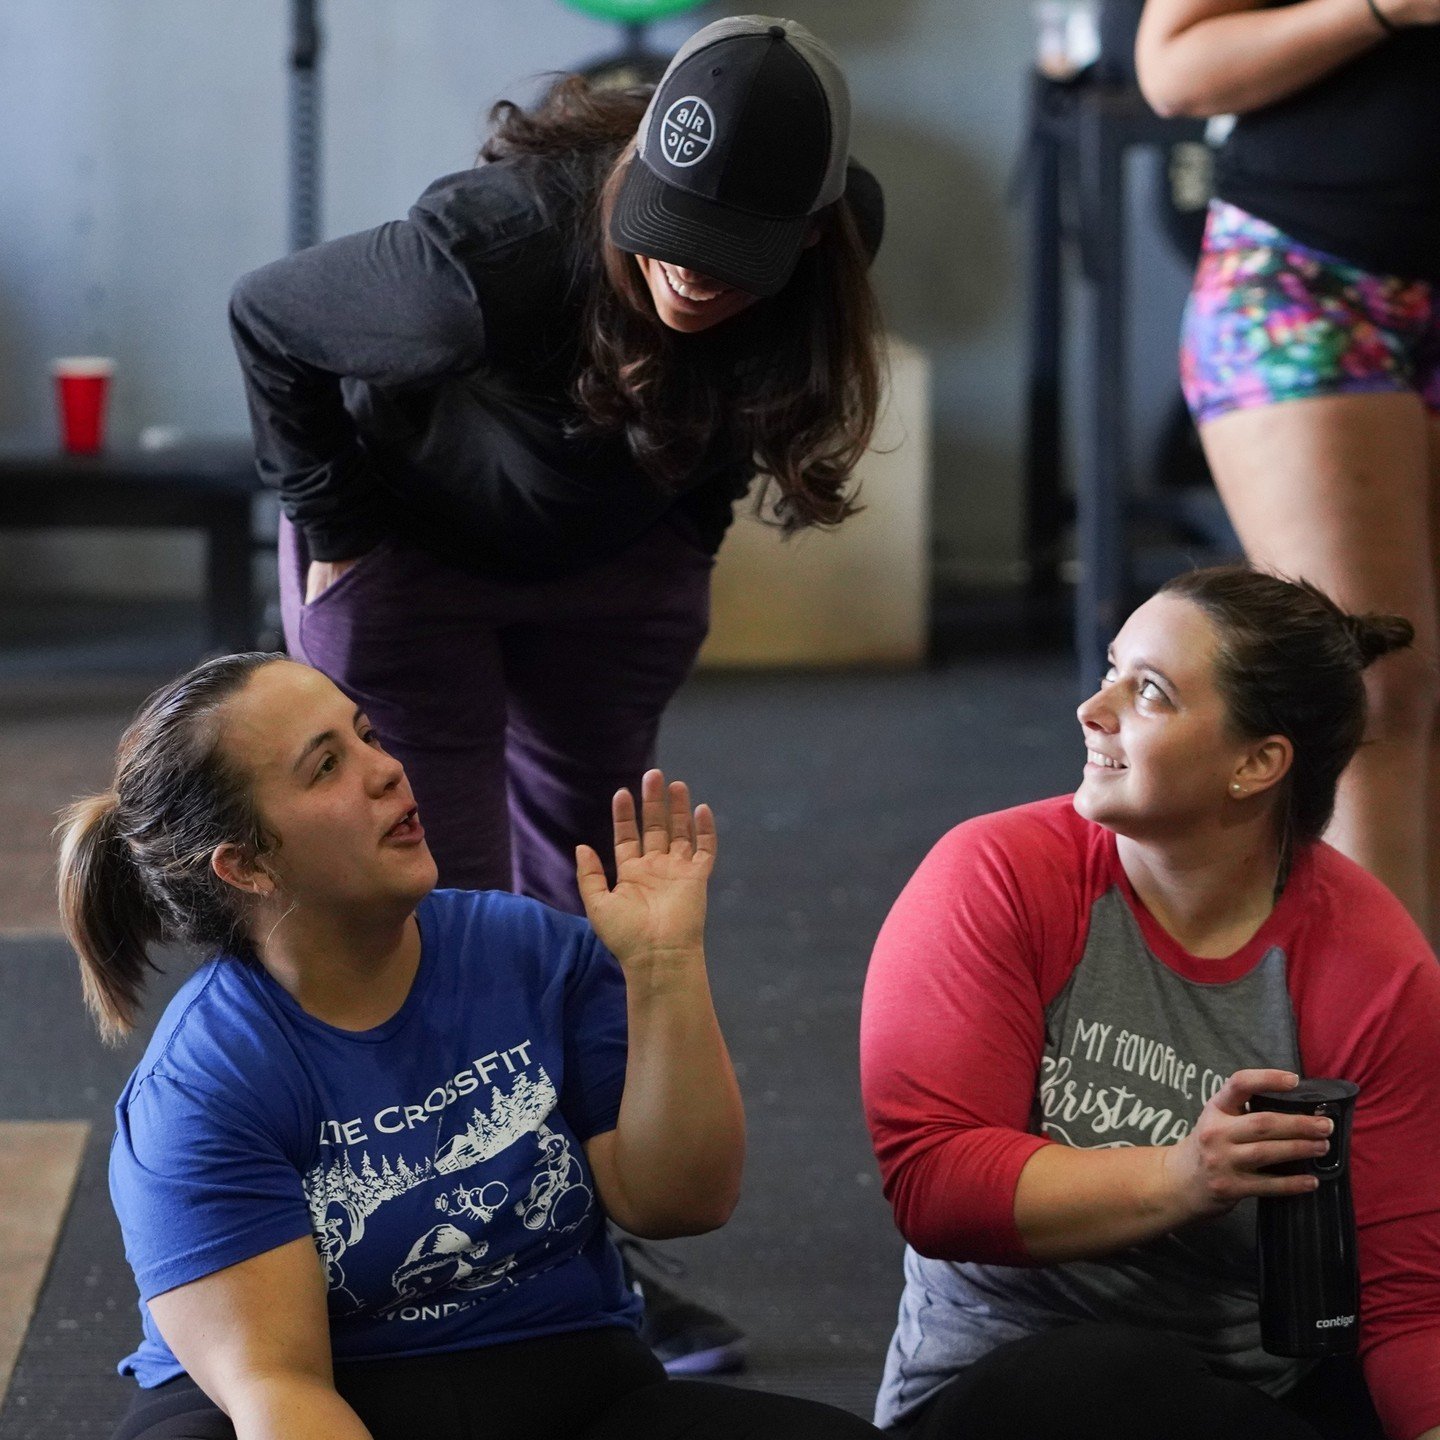 Surround yourself with people who push you. ⁠
⁠
People who challenge you⁠
⁠
People who make you better⁠
⁠
People who make you happy ⁠
⁠
We've got plenty of those over here. ⁠
⁠
Hit up the link in our bio to schedule a free personal training session!